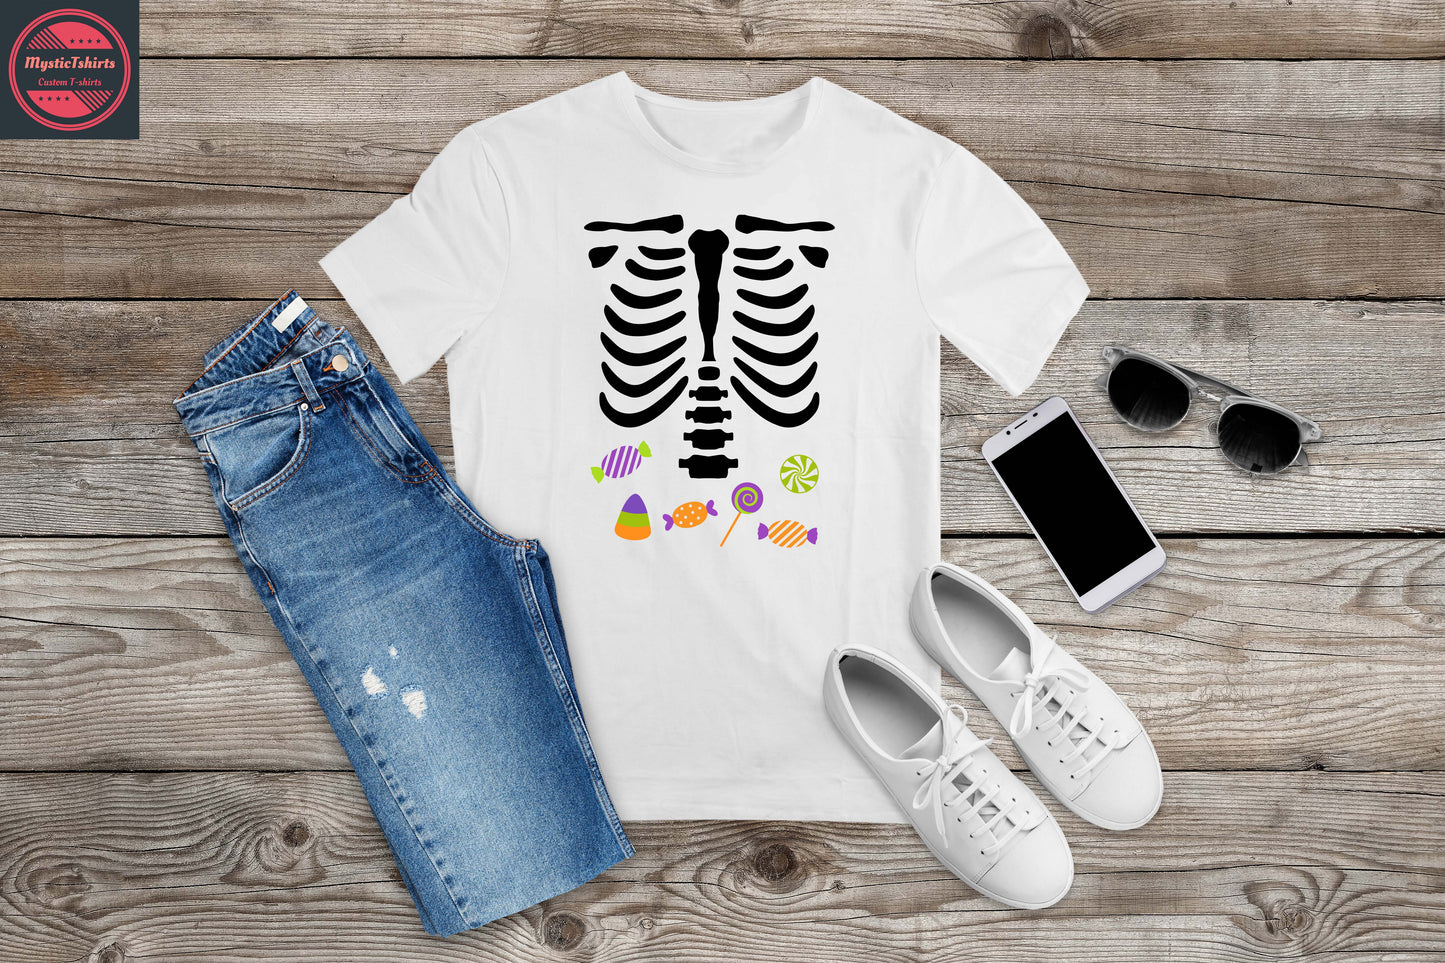 179. HALLOWEEN CANDY, Custom Made Shirt, Personalized T-Shirt, Custom Text, Make Your Own Shirt, Custom Tee